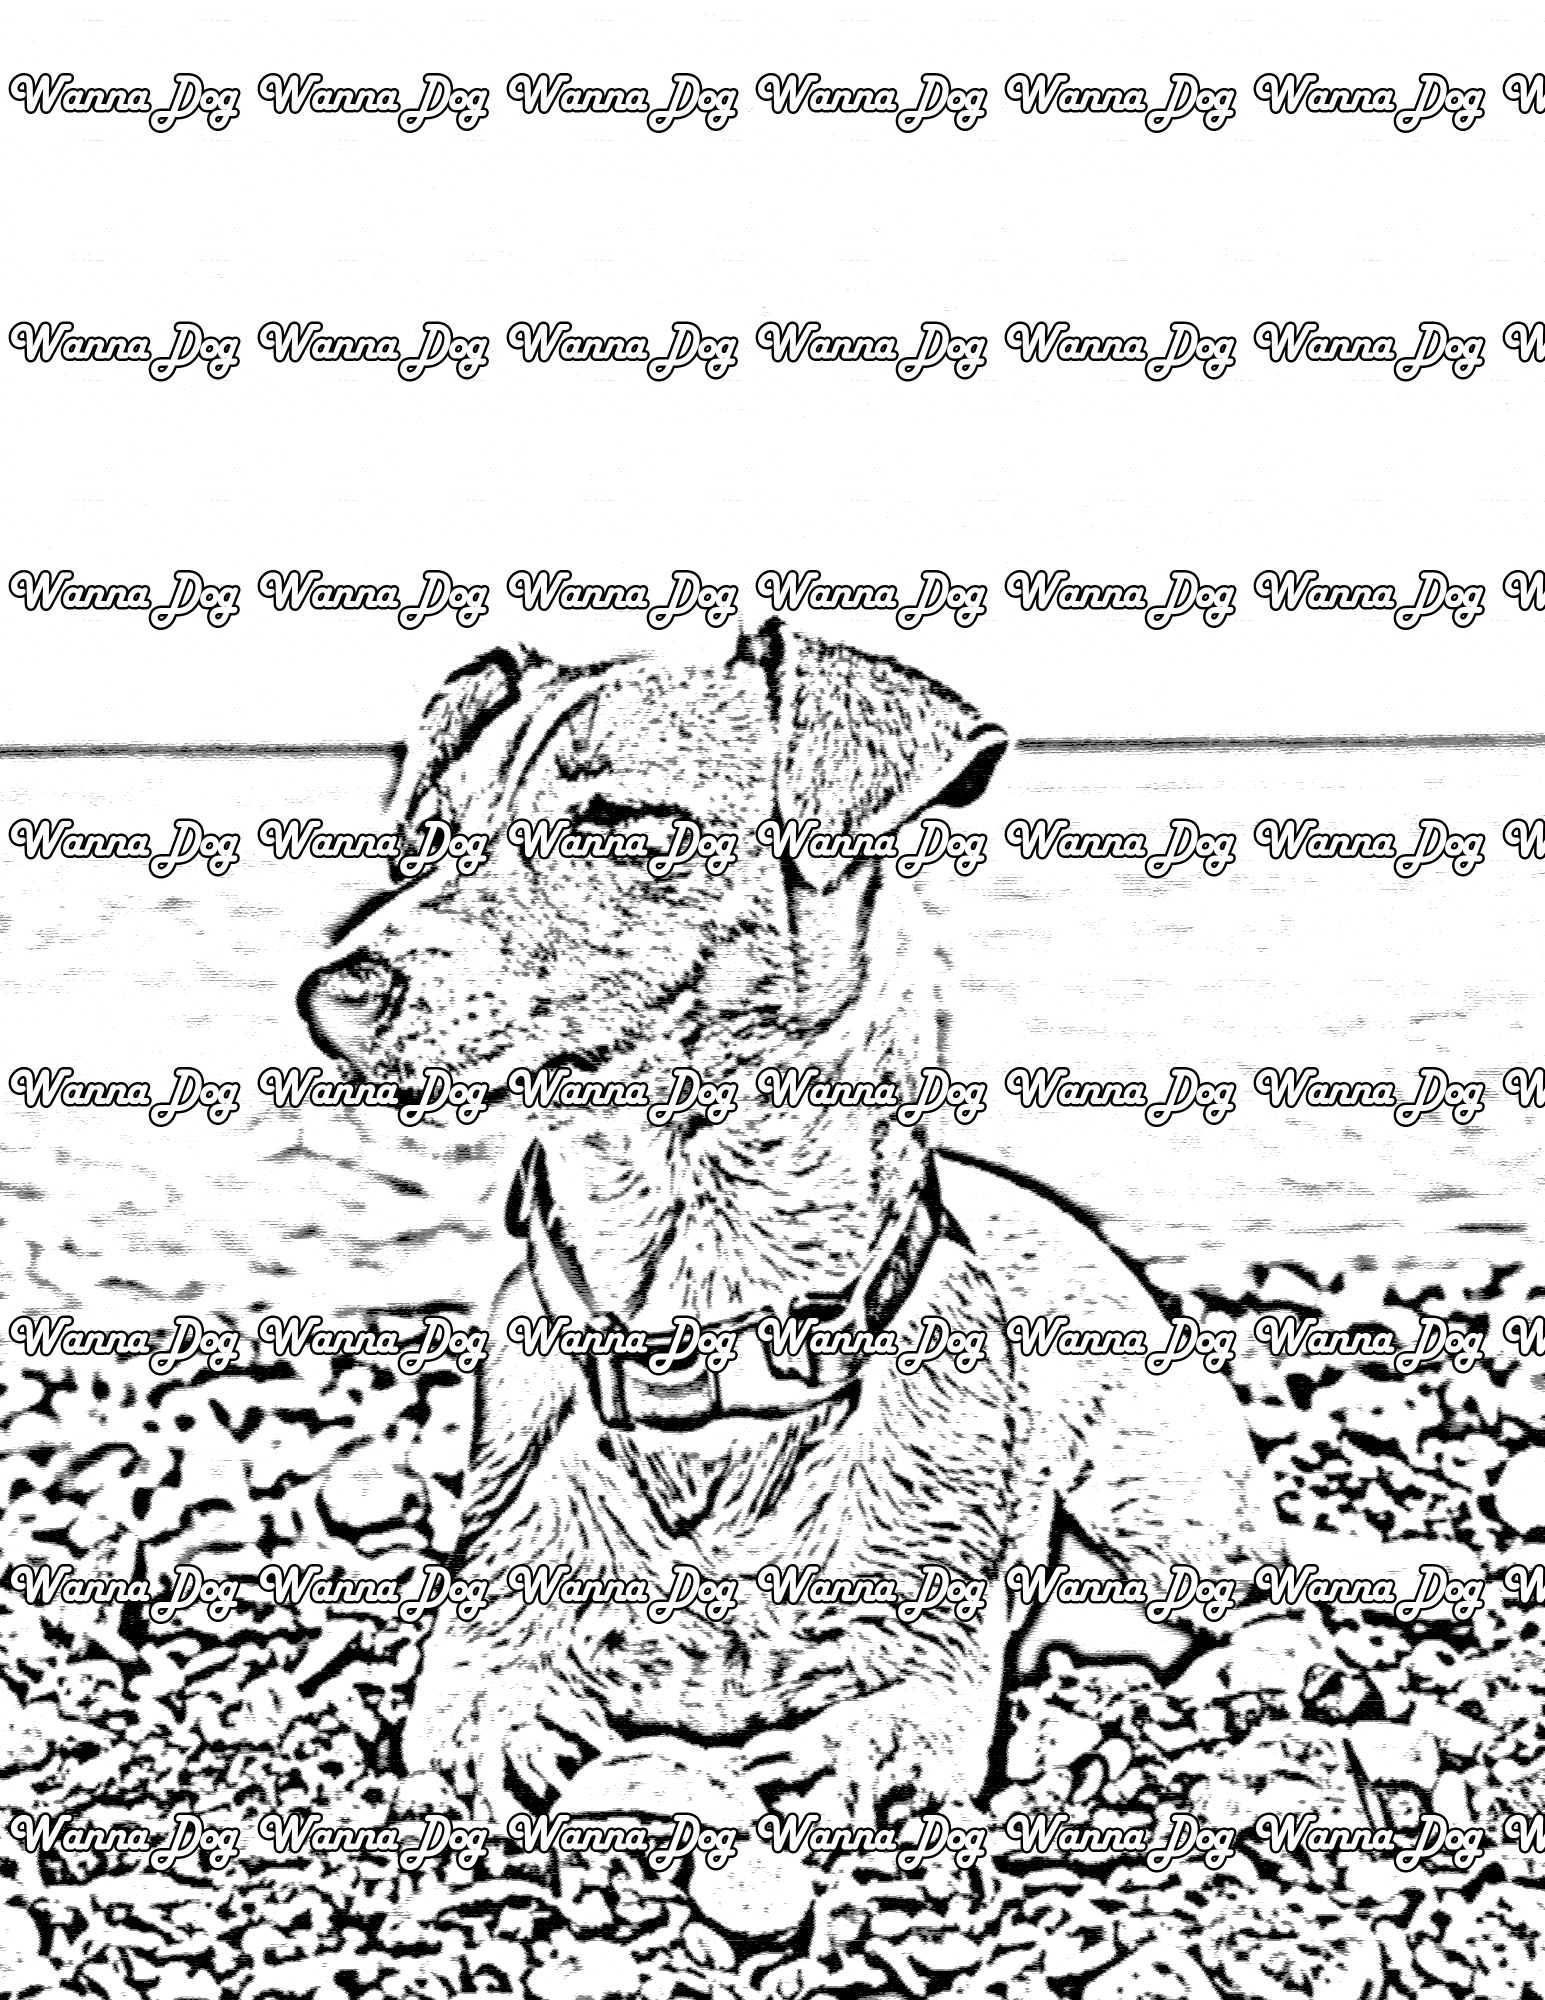 Jack Russell Terrier Coloring Page of a Jack Russell Terrier sitting near the water